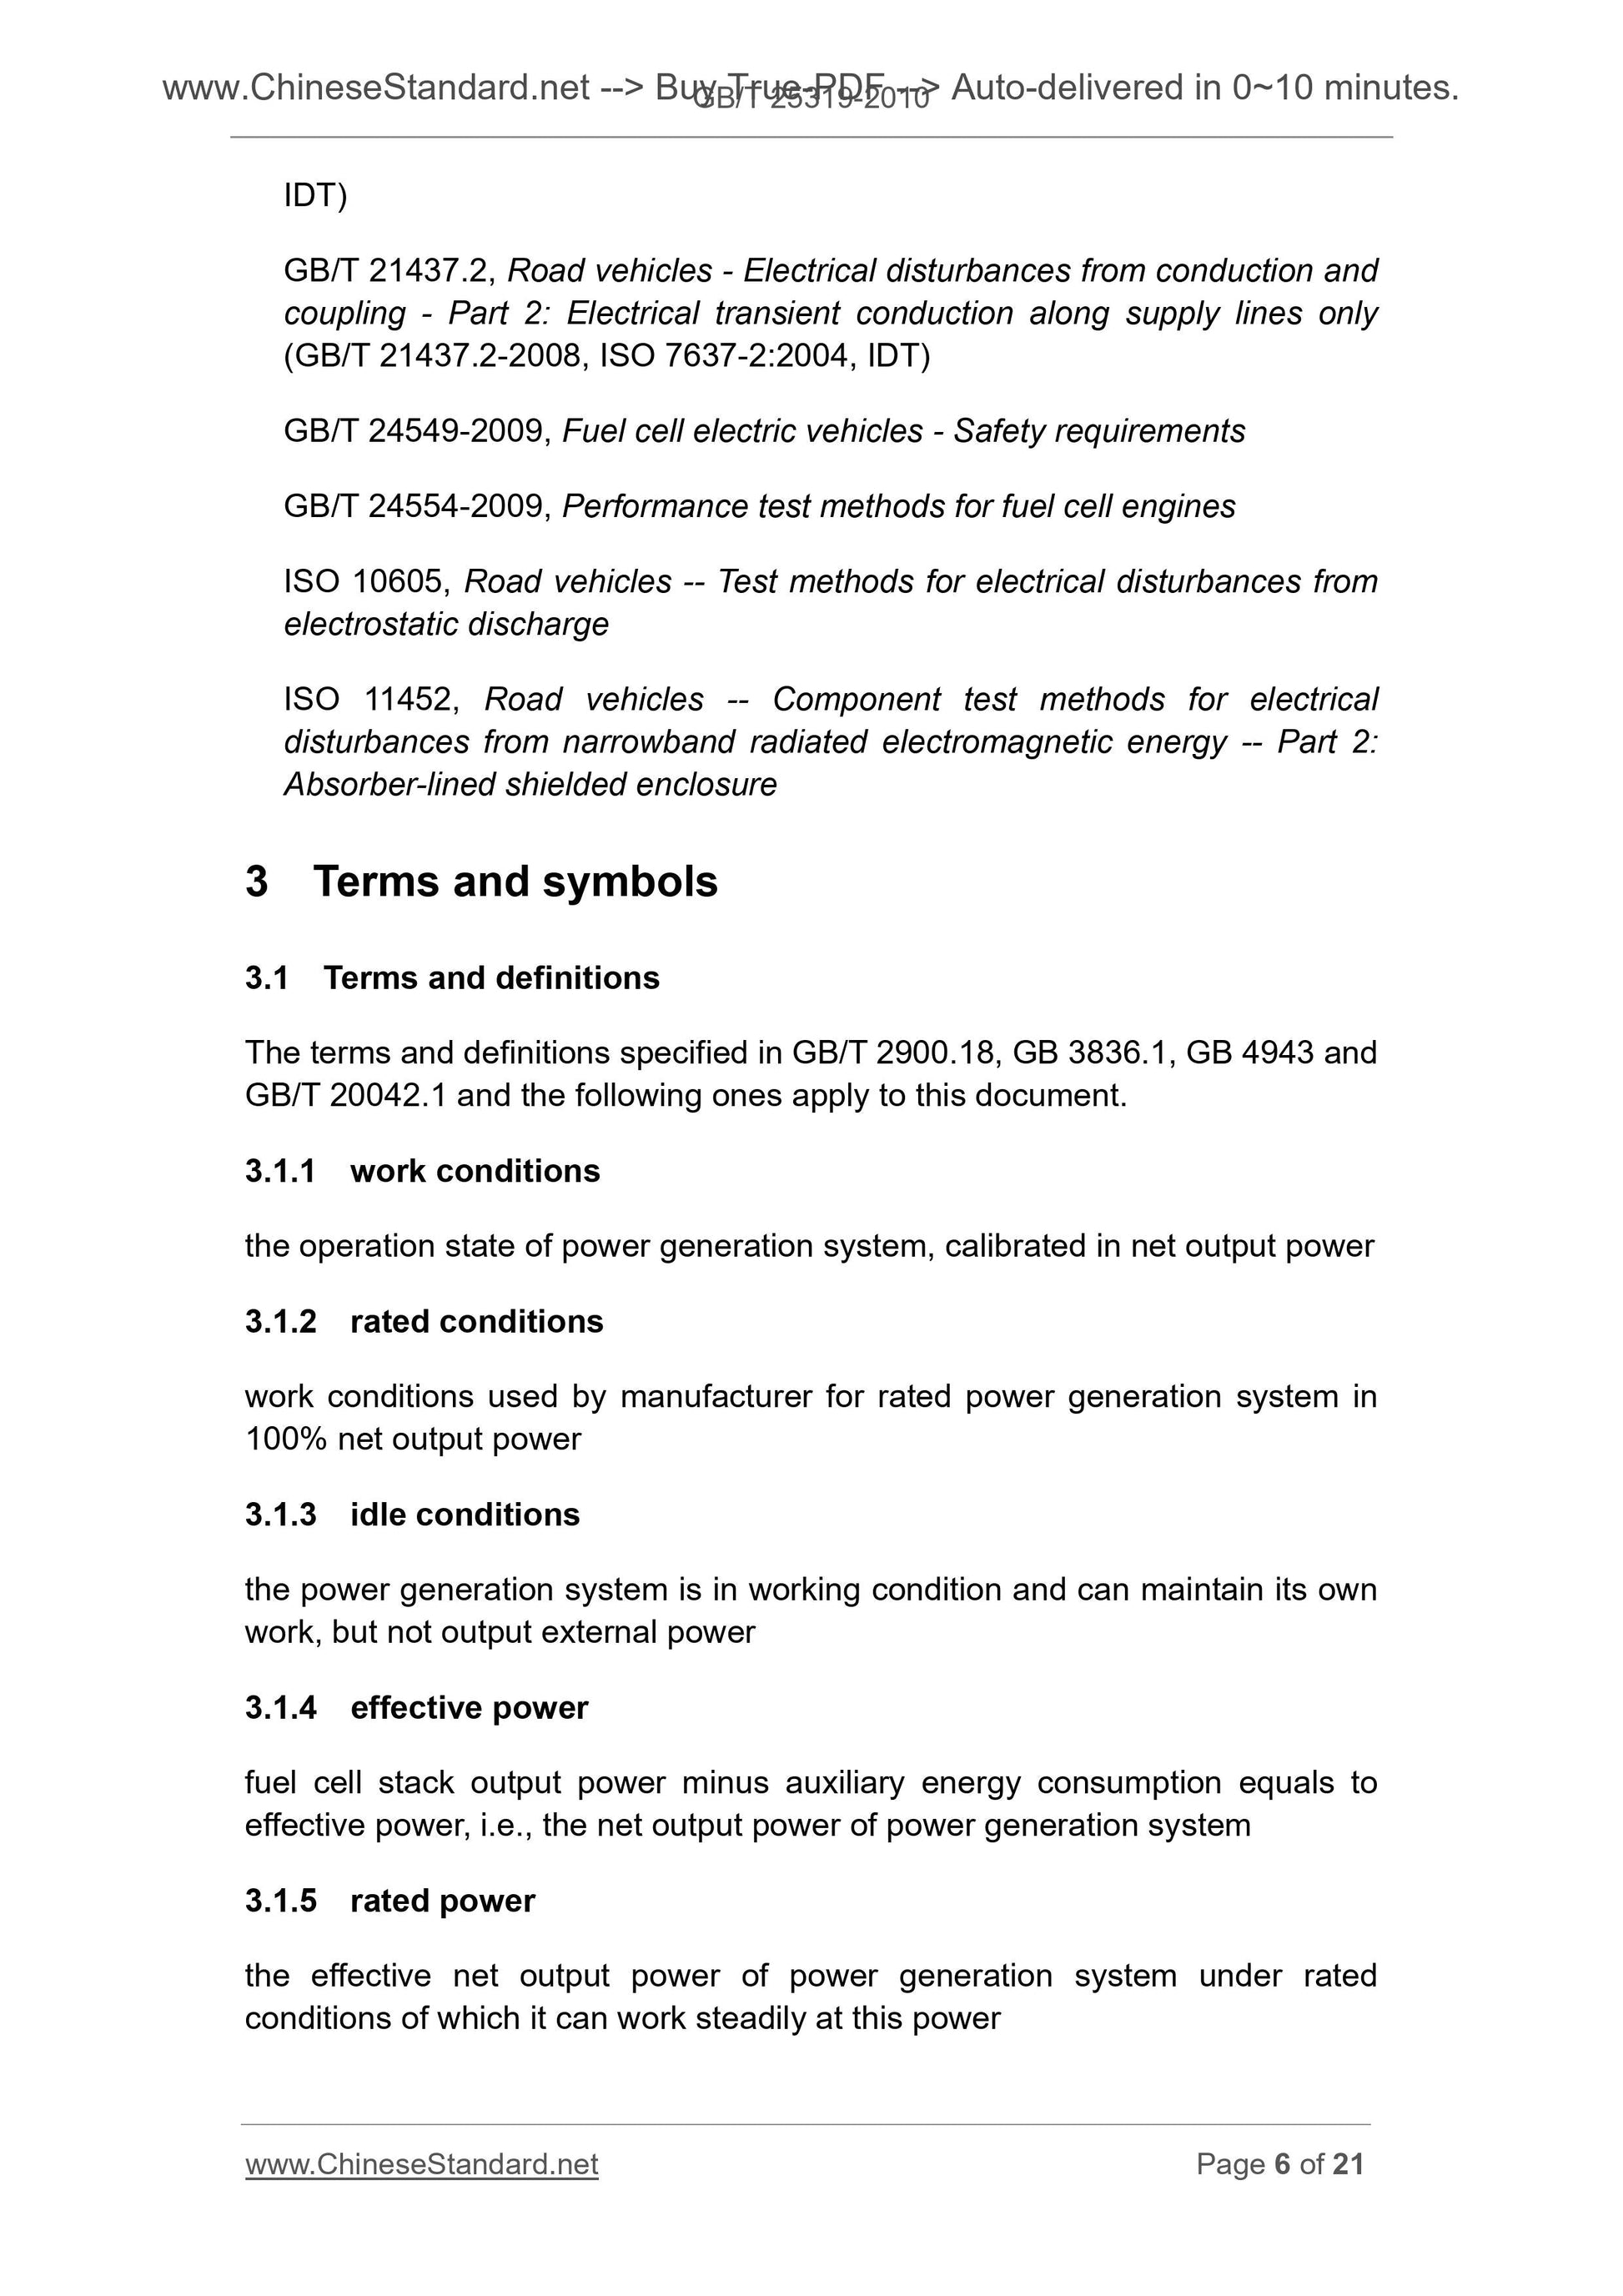 GB/T 25319-2010 Page 6